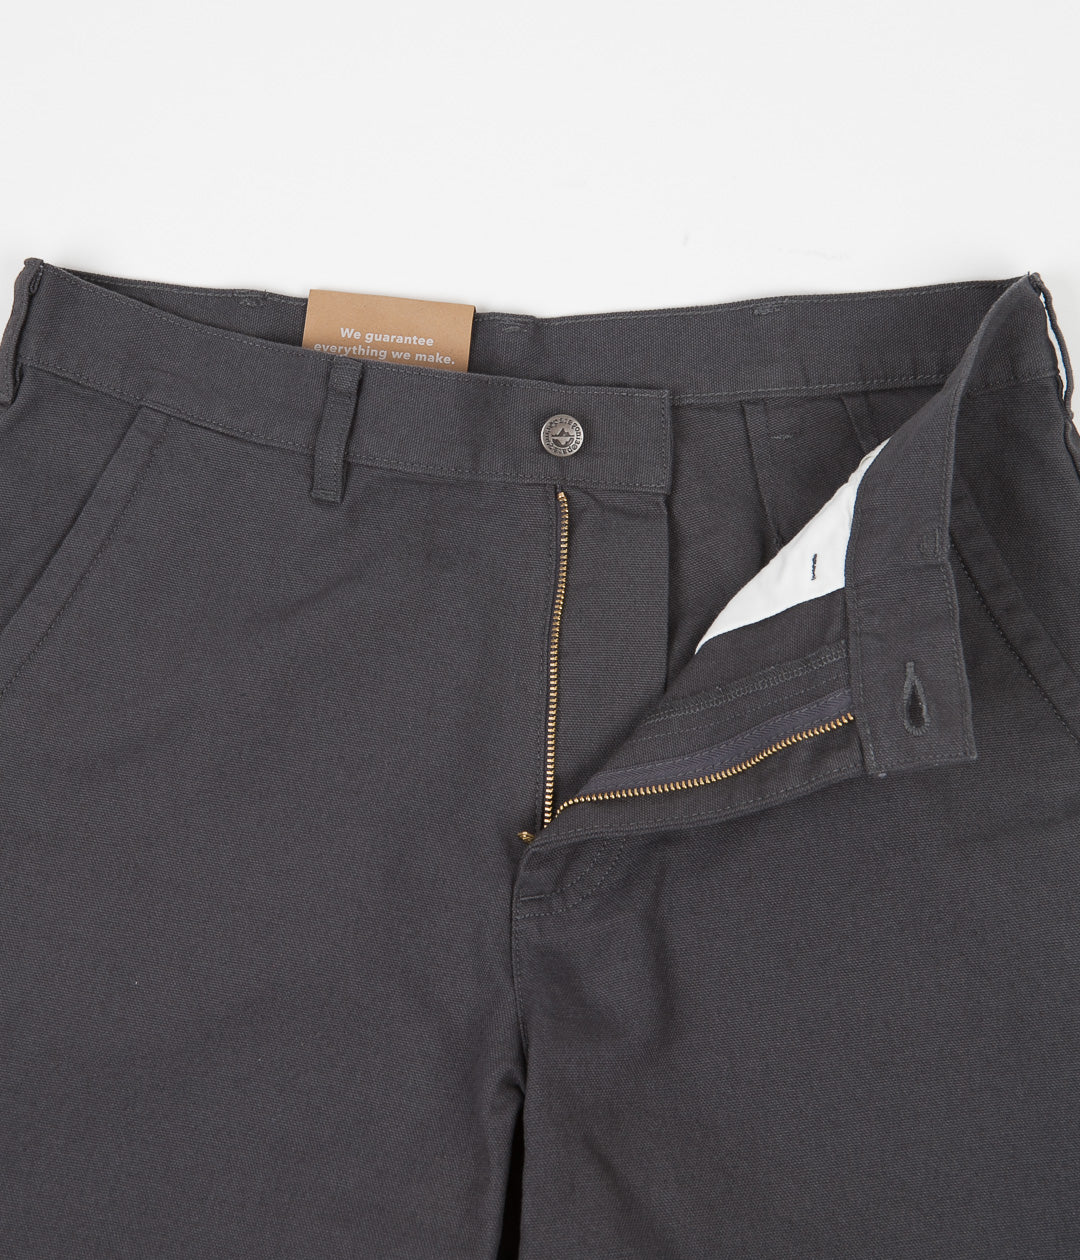 Patagonia Stand Up Shorts - Forge Grey | Flatspot